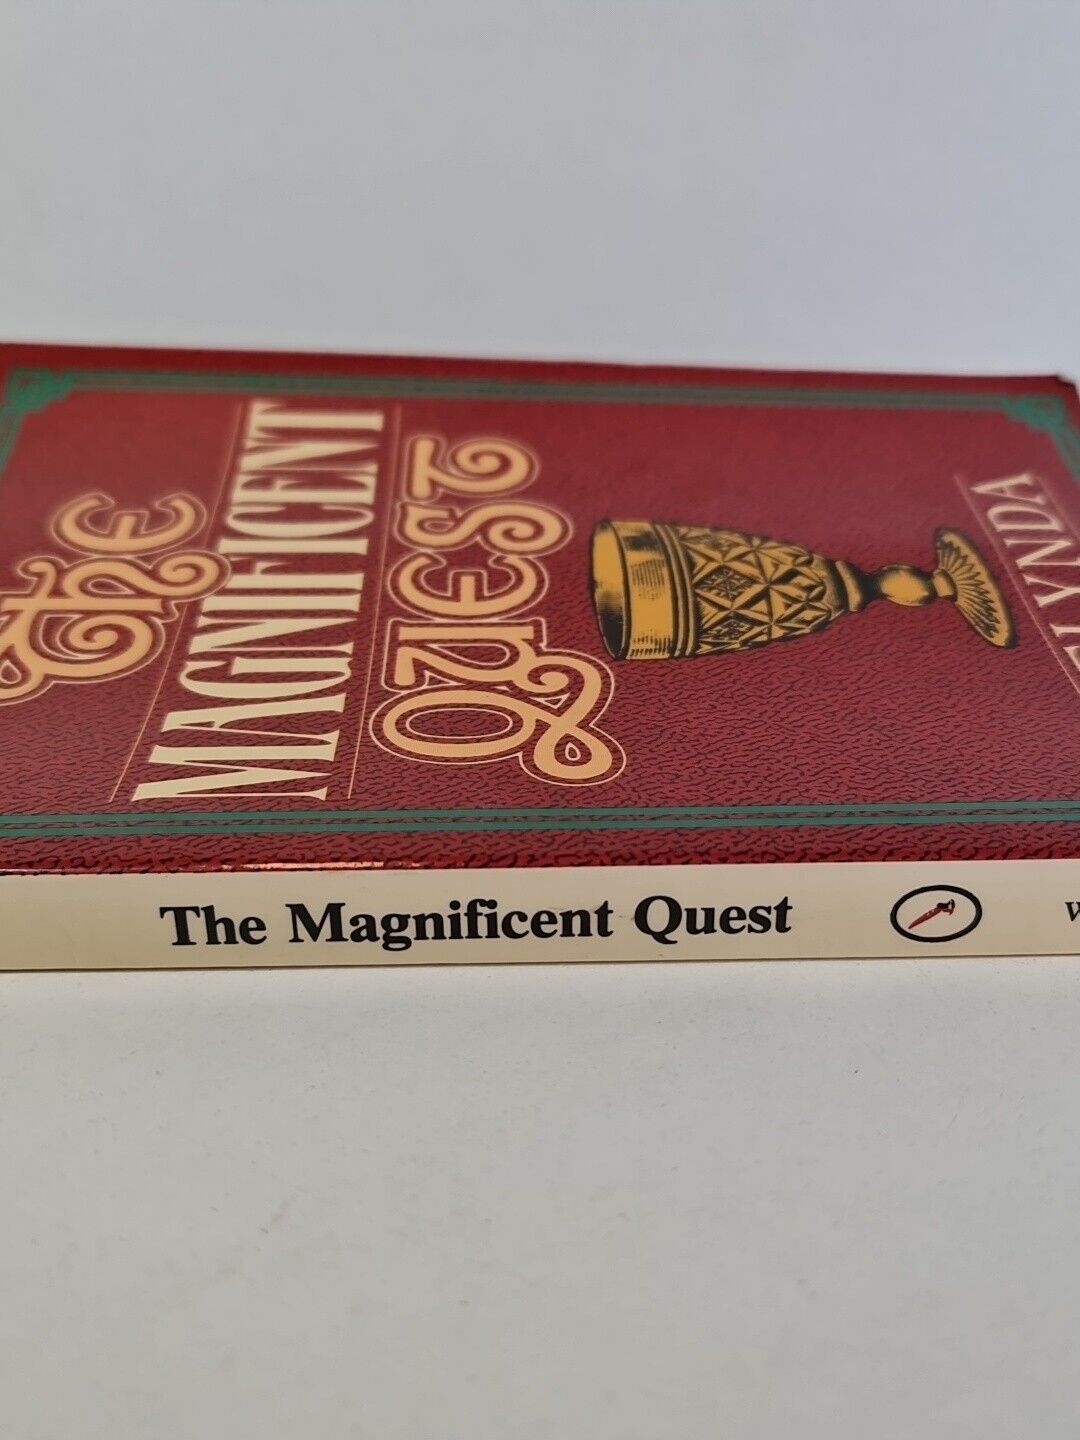 The Magnificent Quest by Kelynda (1997)